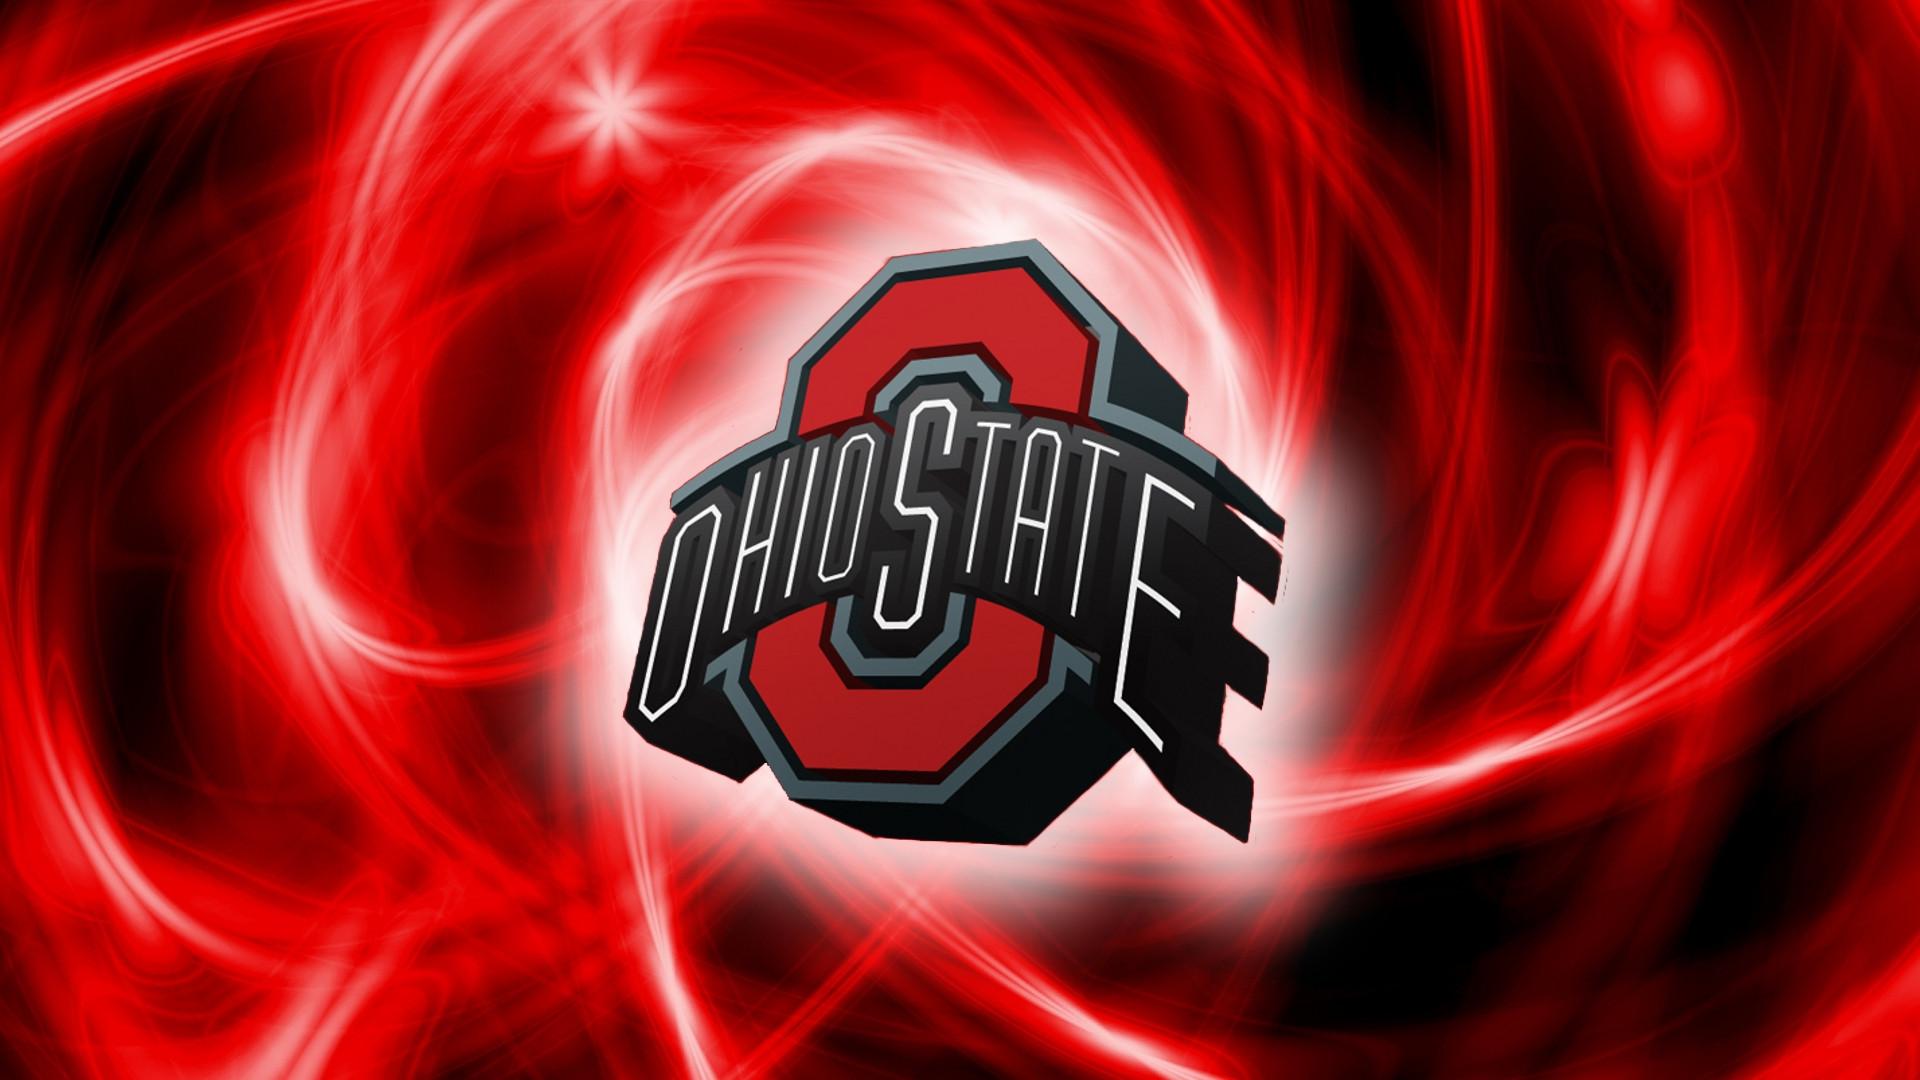 Ohio State Buckeyes Football Backgrounds Download Wallpapers